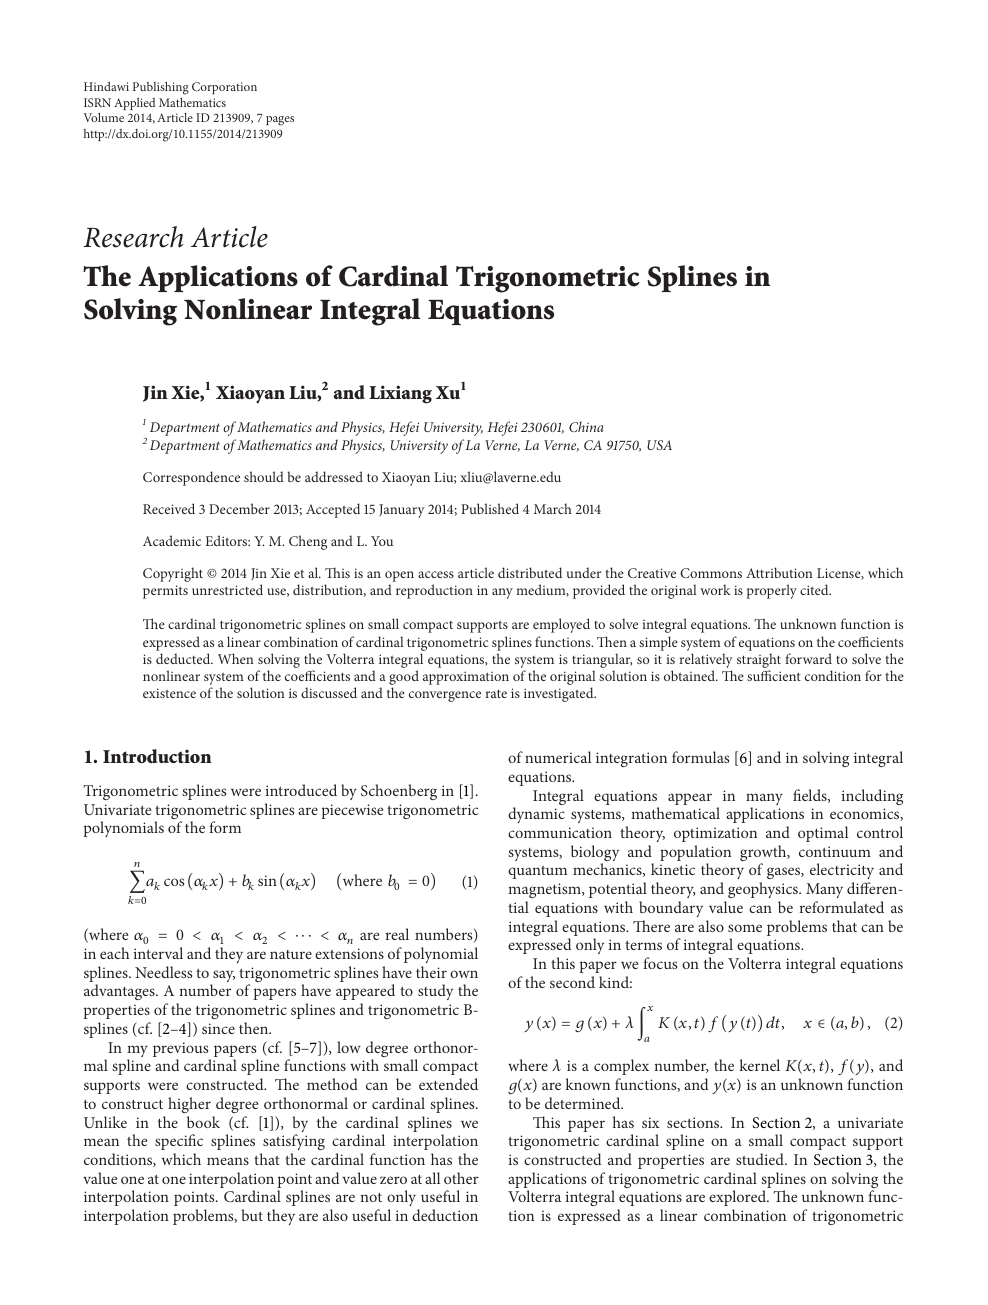 The Applications Of Cardinal Trigonometric Splines In Solving Nonlinear Integral Equations Topic Of Research Paper In Mathematics Download Scholarly Article Pdf And Read For Free On Cyberleninka Open Science Hub